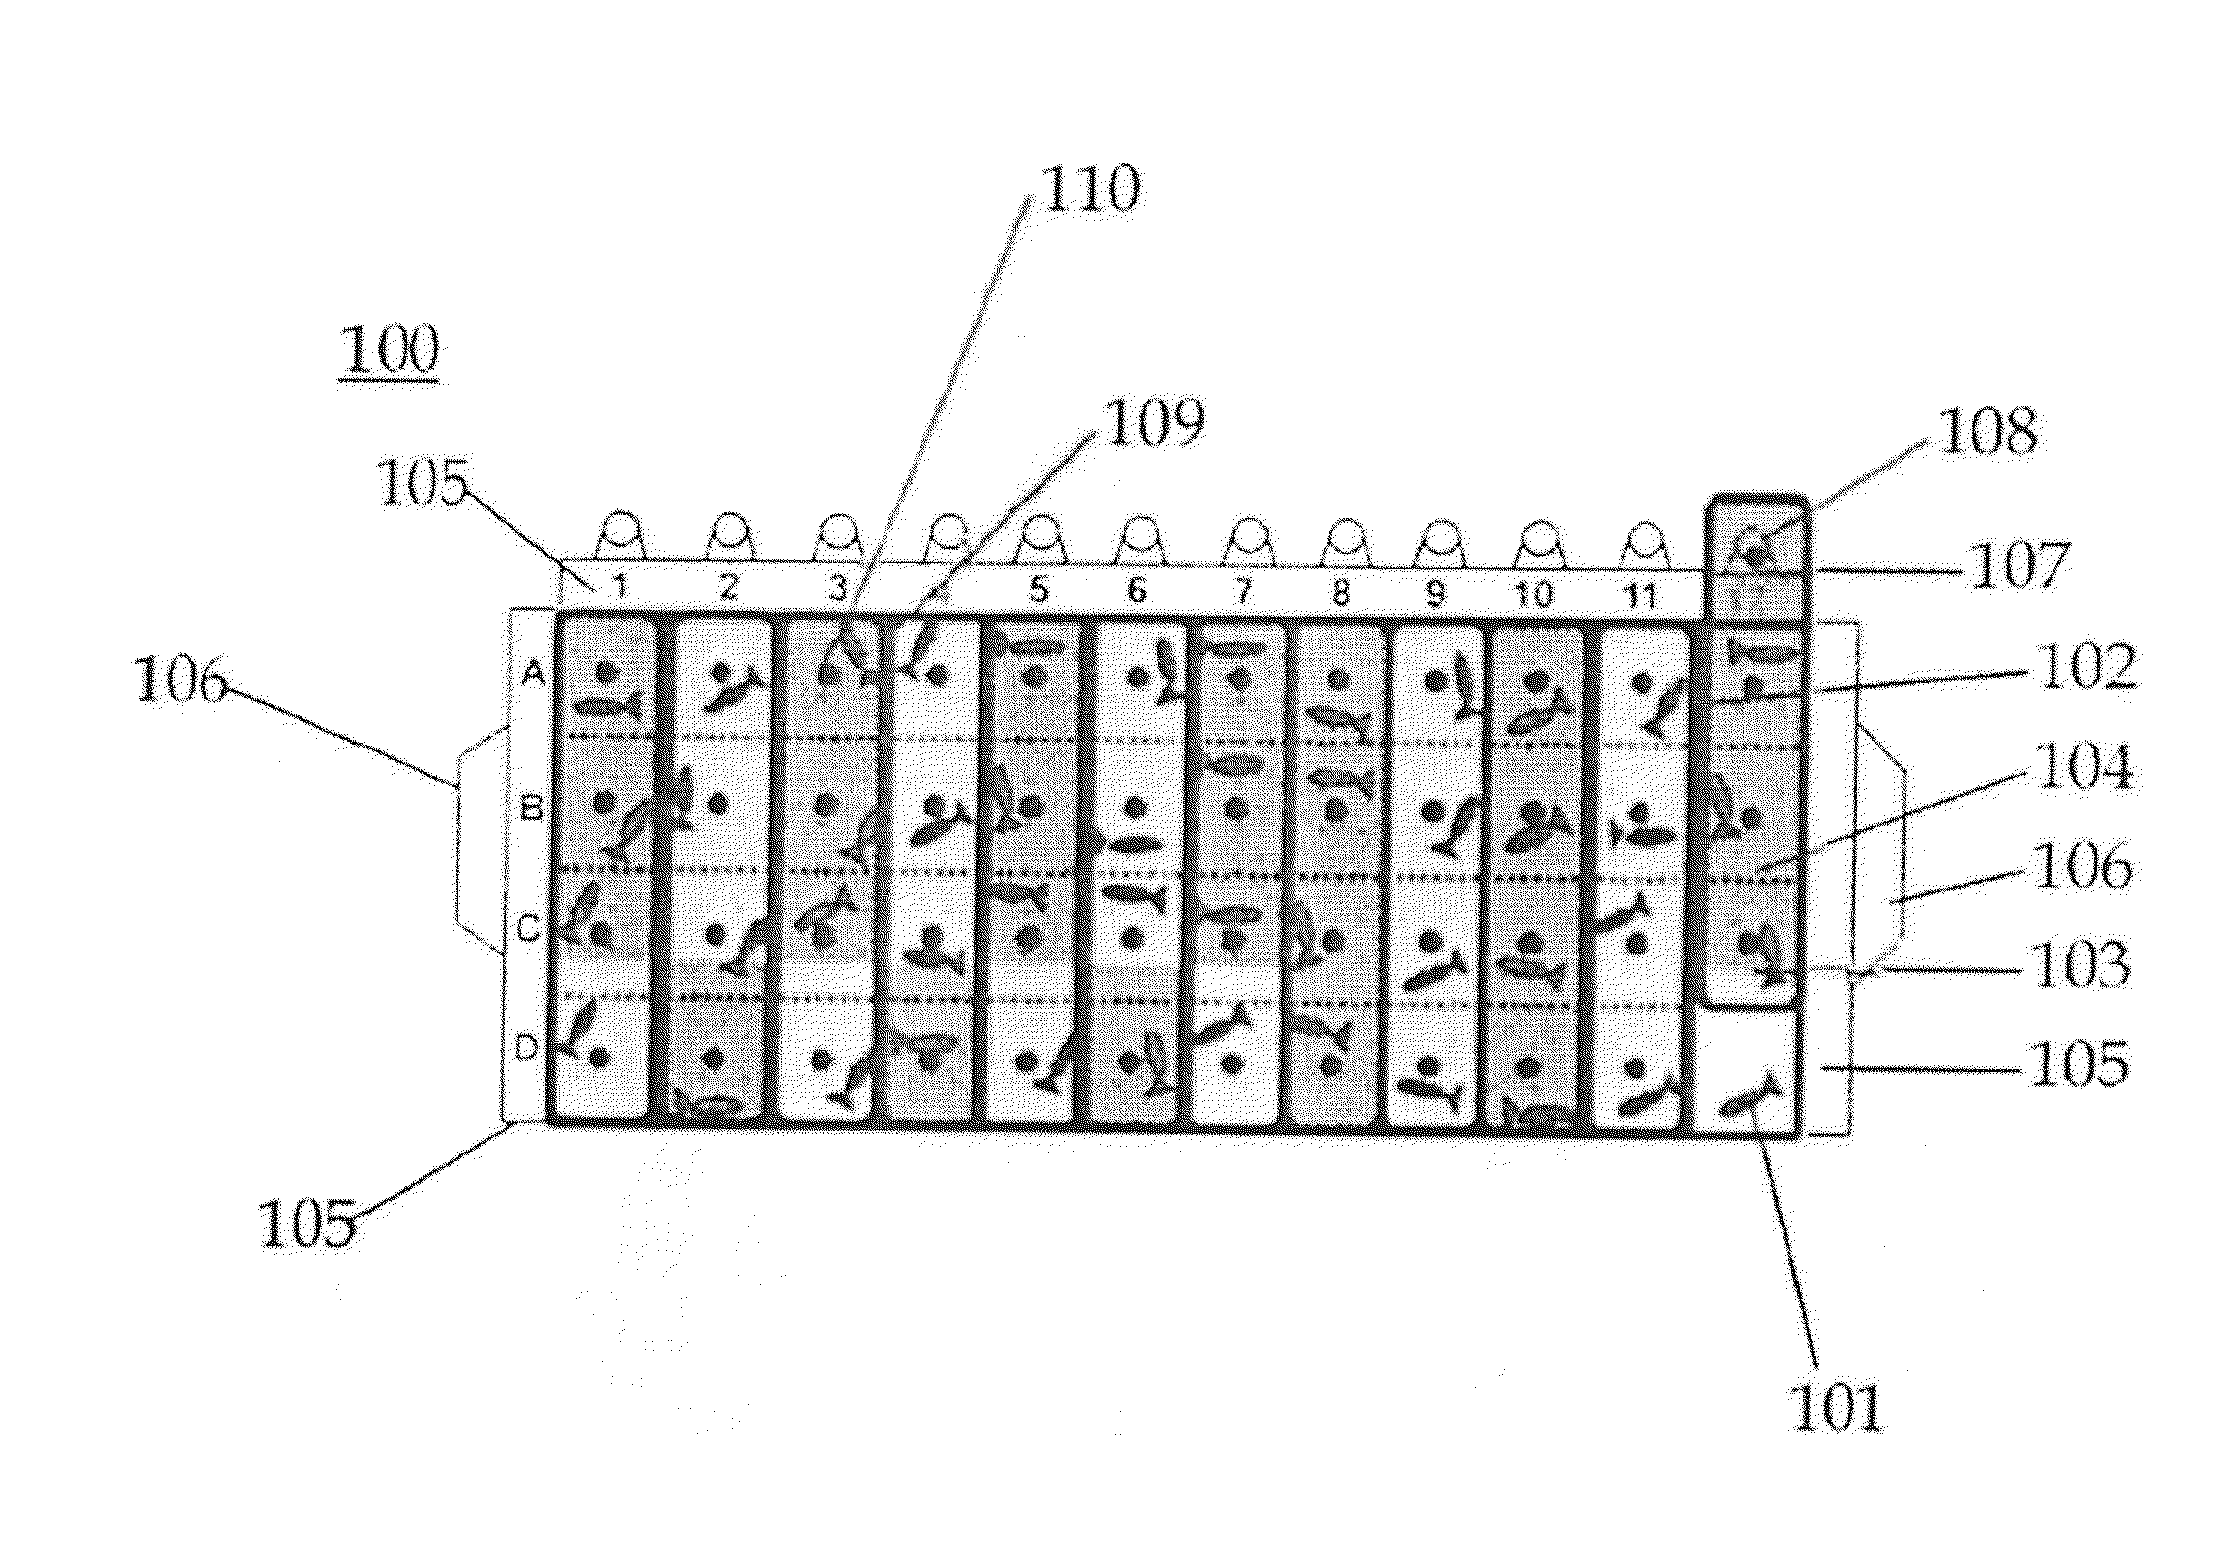 System and apparatus for research and testing of small aquatic species